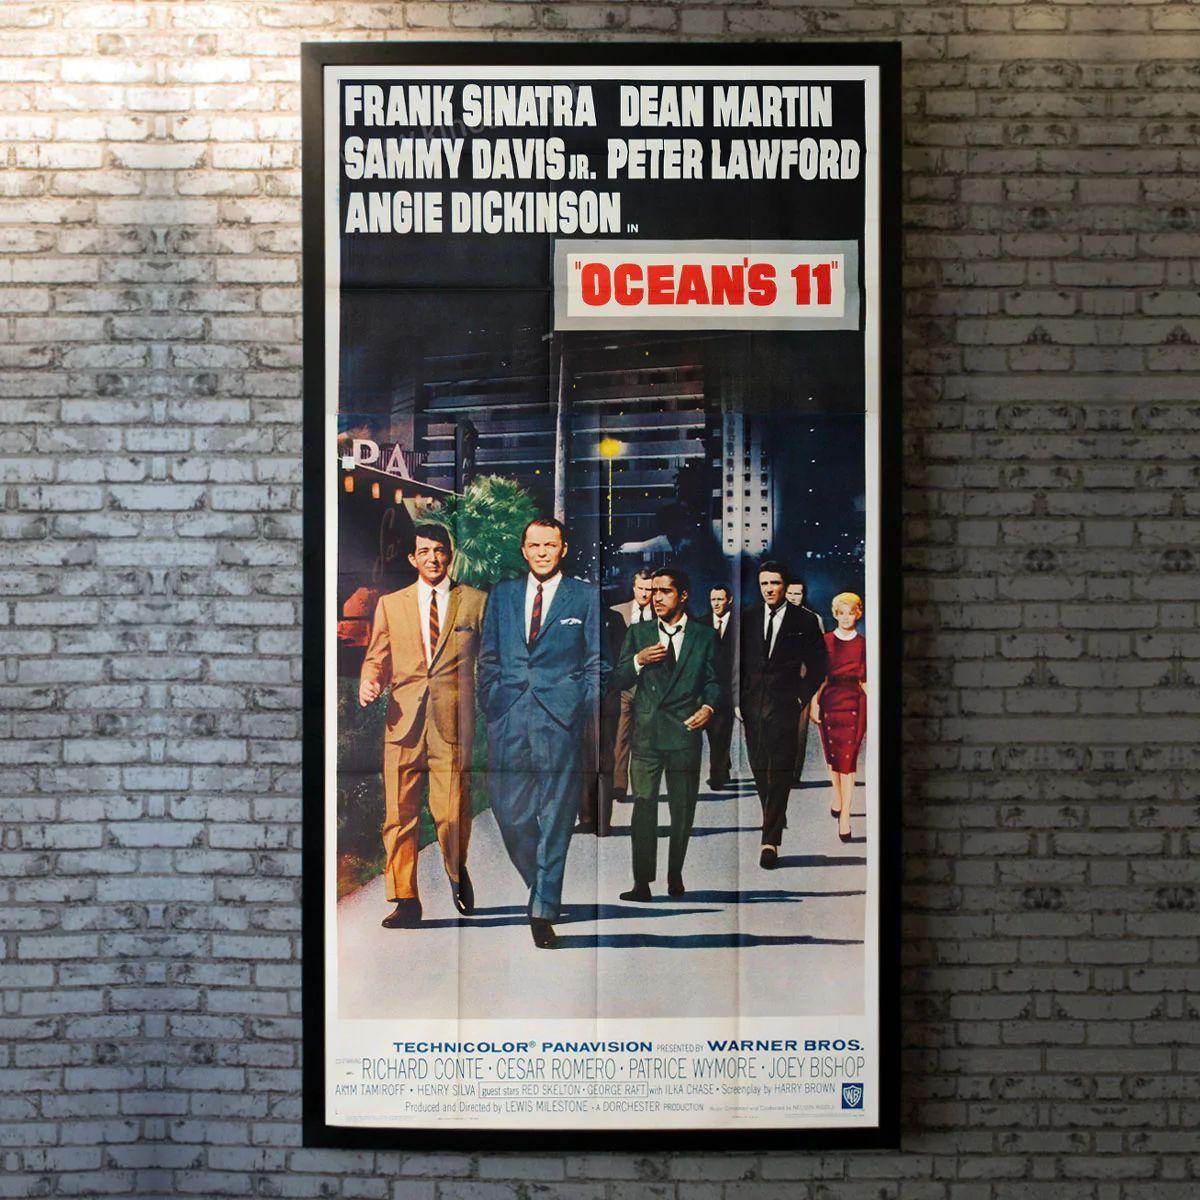 Ocean's 11 / Ocean's Eleven, Unframed Poster, 1960

Three Sheet (41 X 81 Inches). Best poster on the Las Vegas heist gambling crime classic featuring 'The Rat Pack'. Danny Ocean gathers a group of his World War II compatriots to pull off the